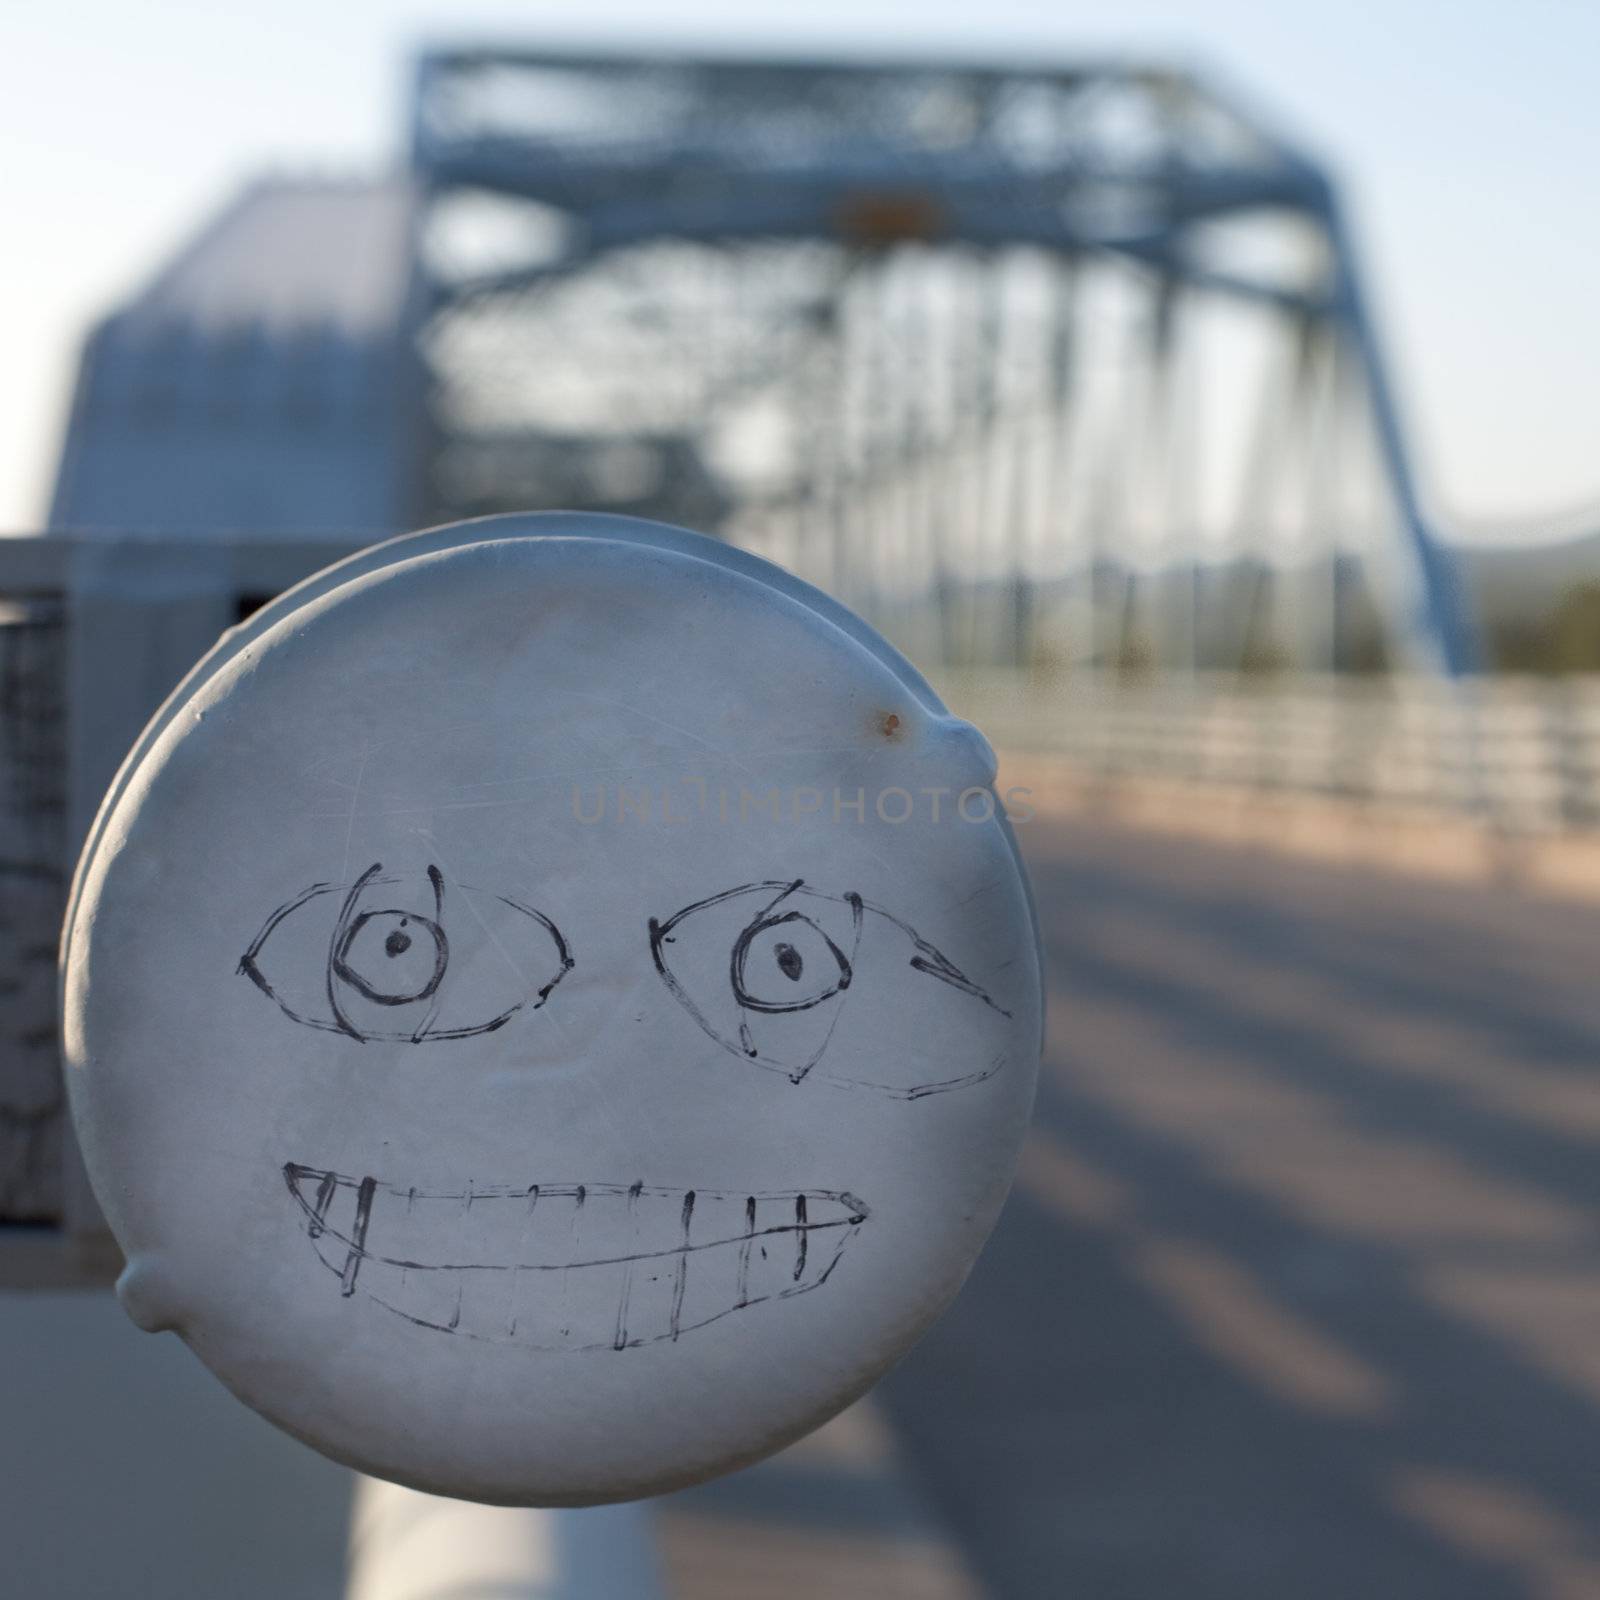 Funny Face Graffiti by PiLens